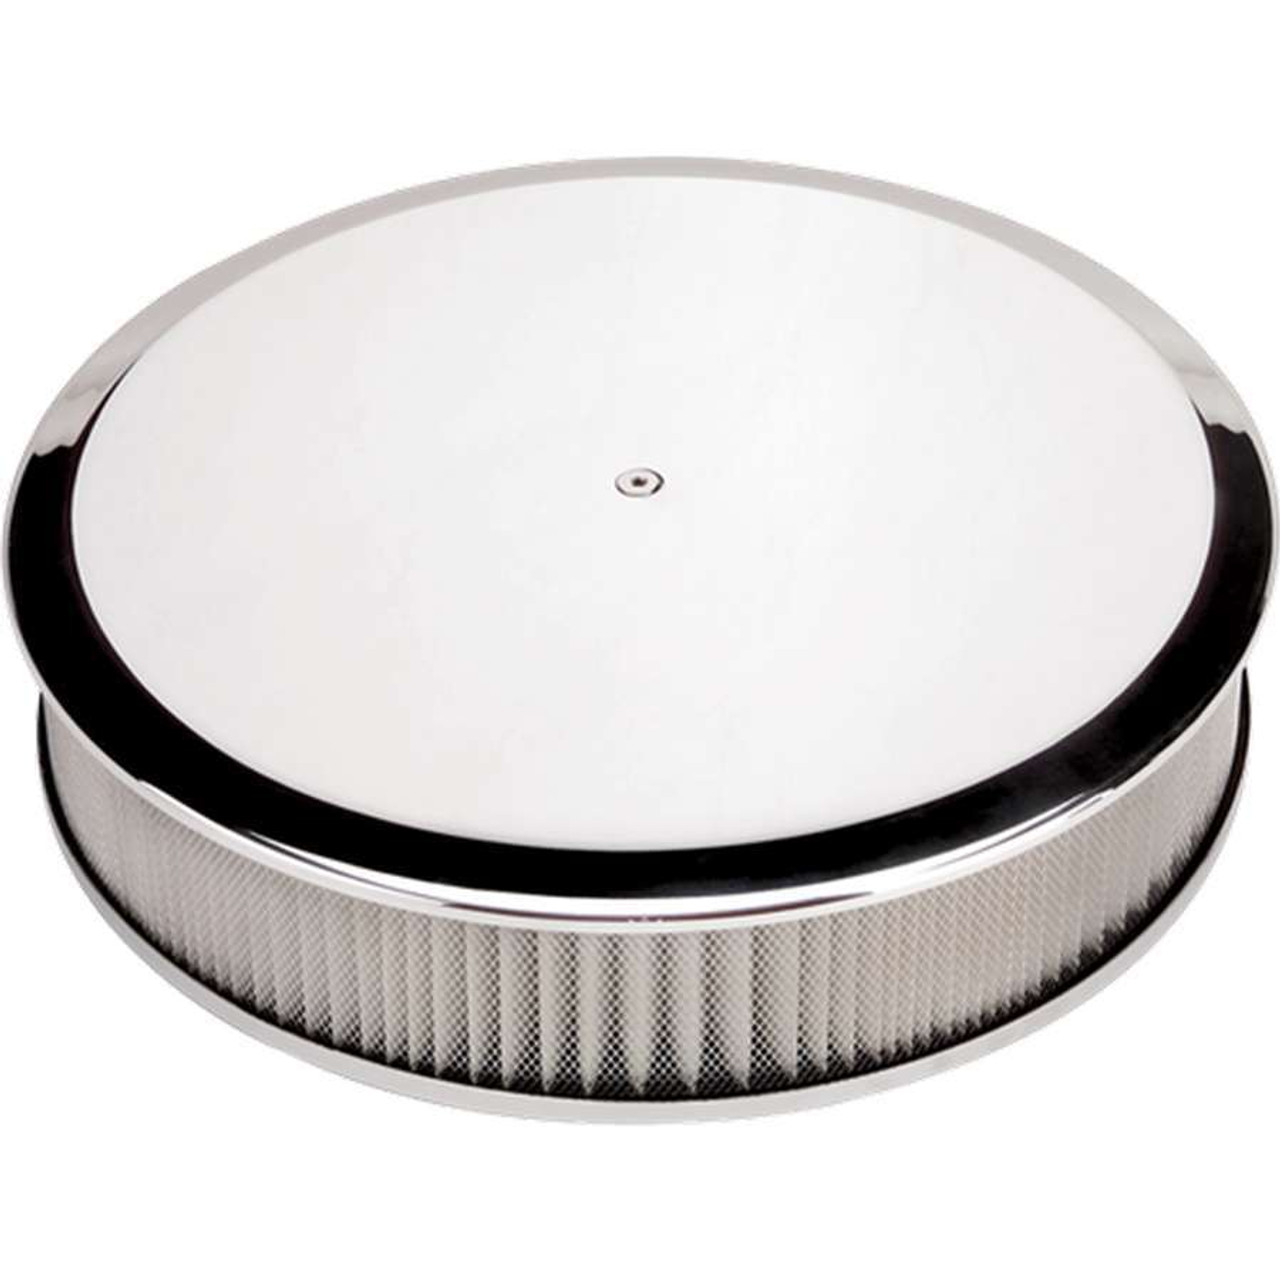 Air Cleaner 14in Round Plain